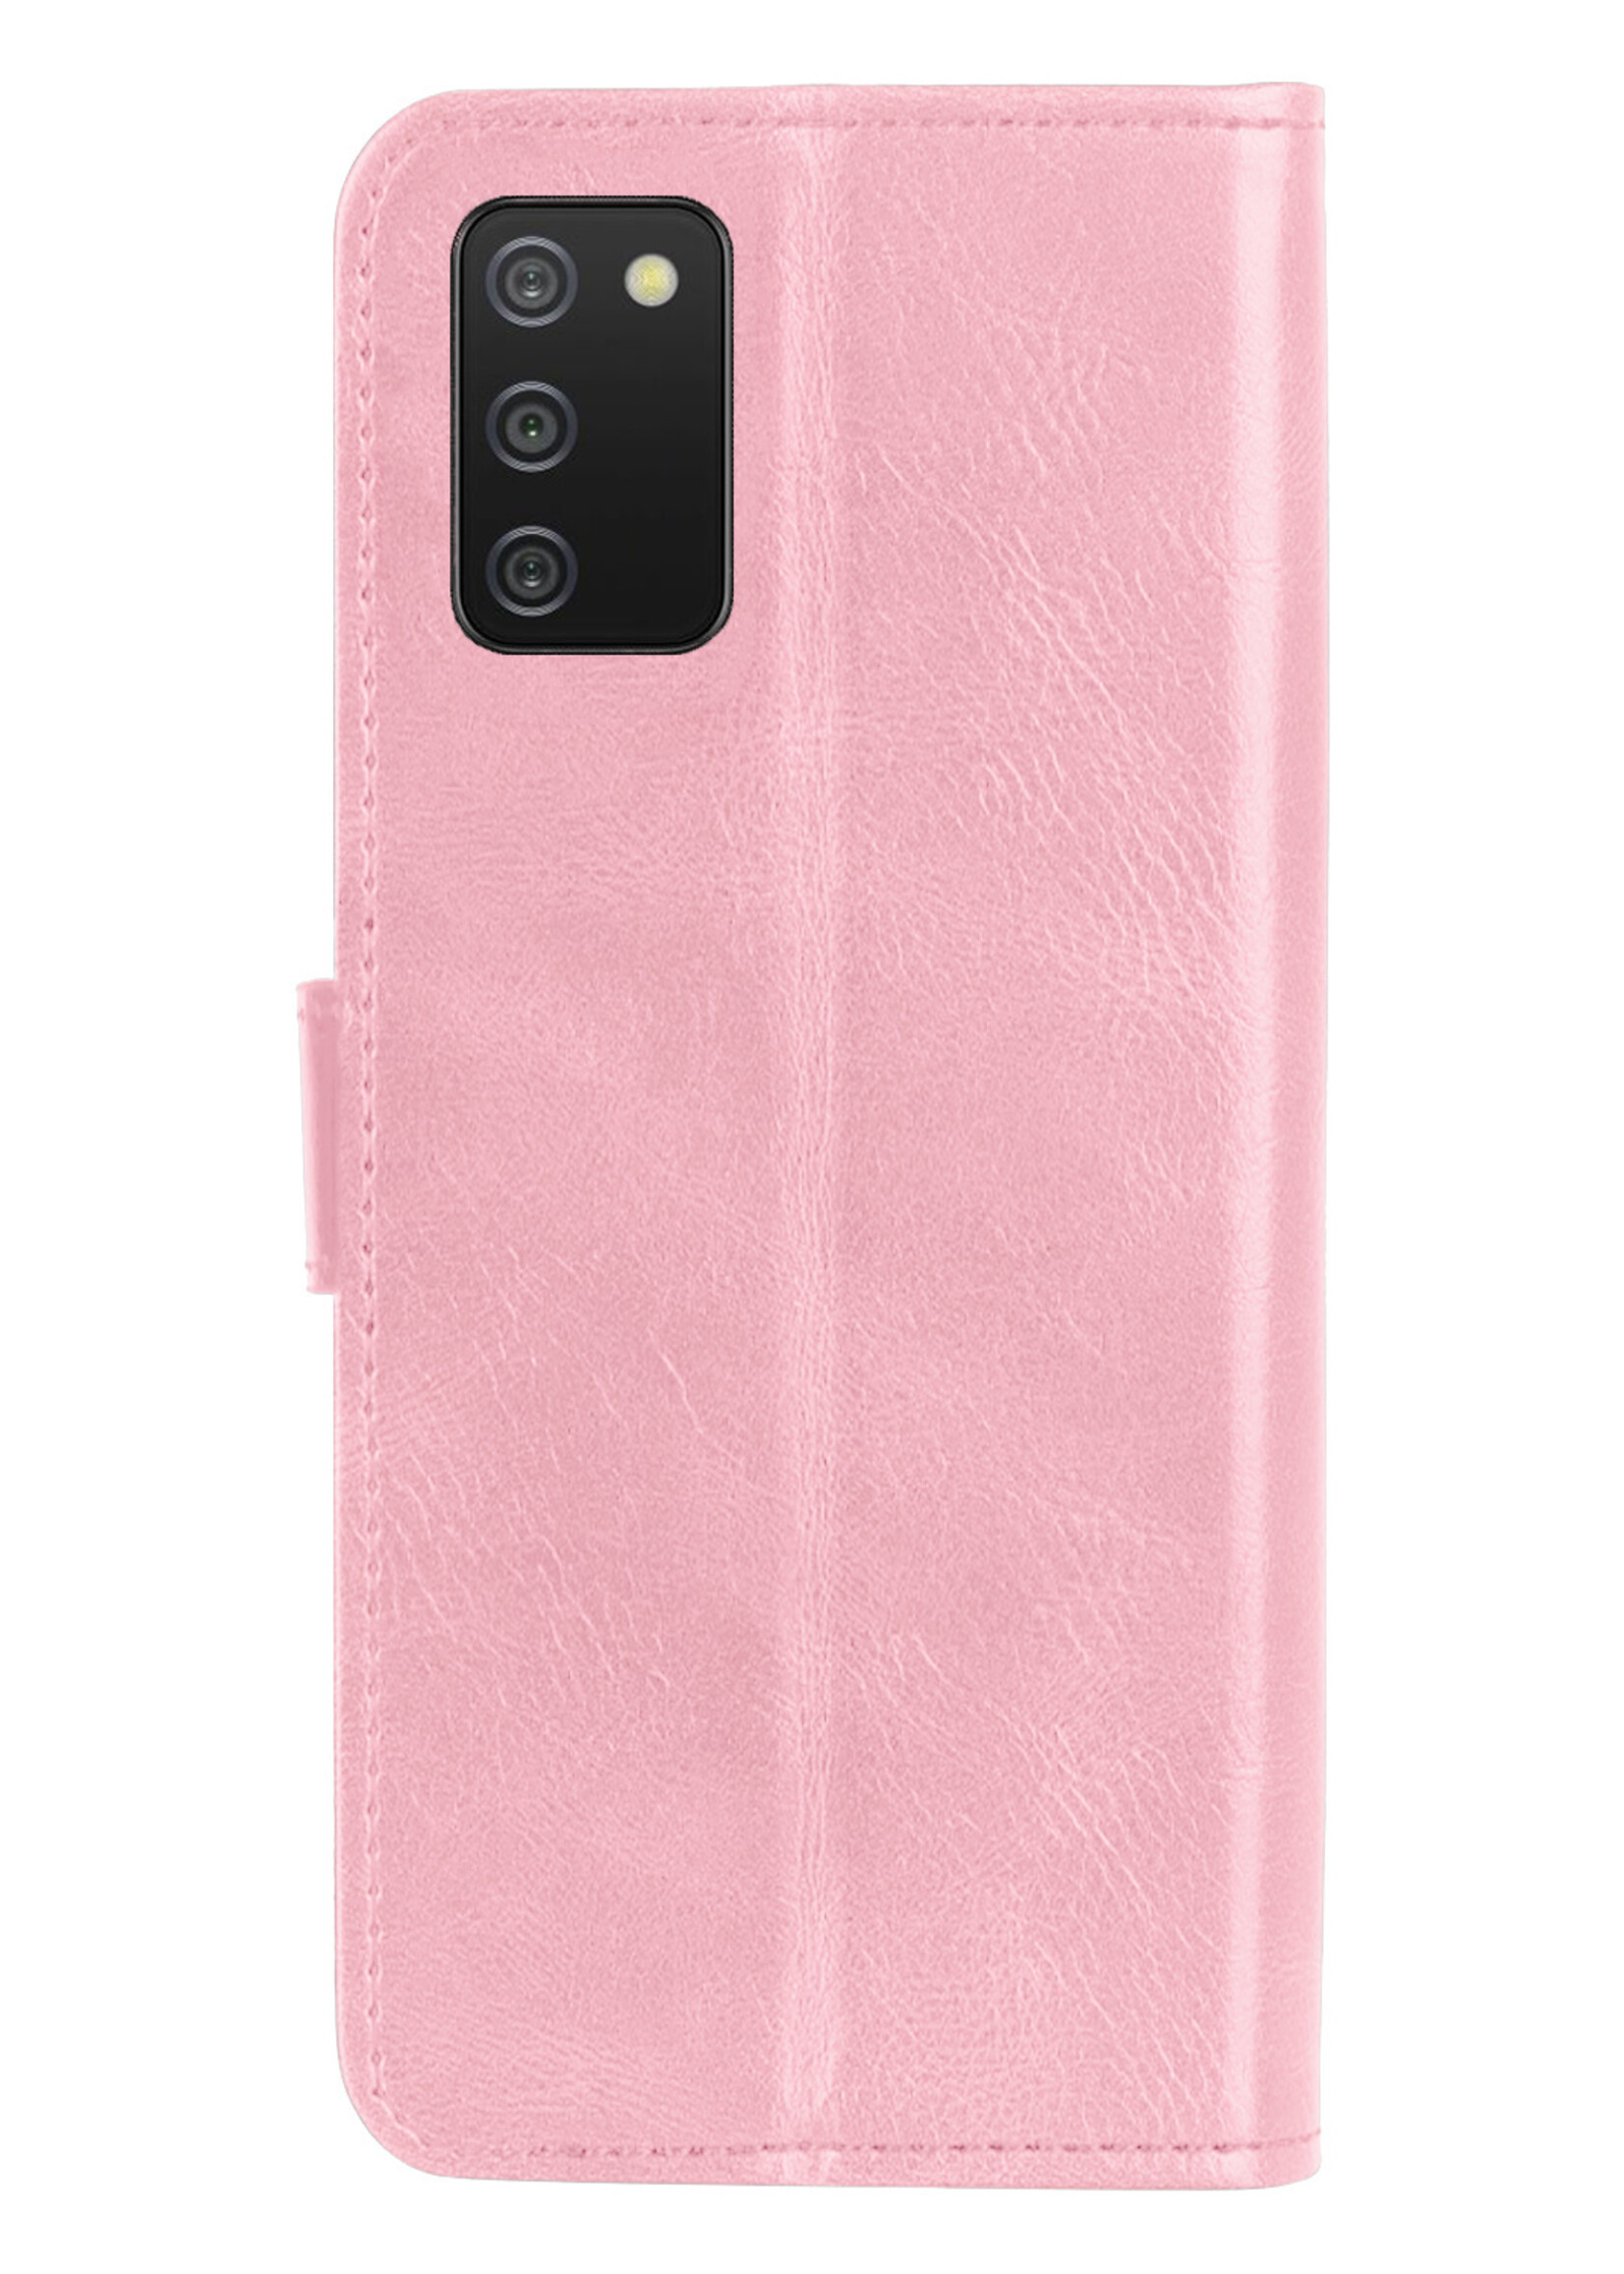 BTH Samsung A03s Hoesje Book Case Hoes - Samsung Galaxy A03s Case Hoesje Portemonnee Cover - Samsung A03s Hoes Wallet Case Hoesje - Licht Roze